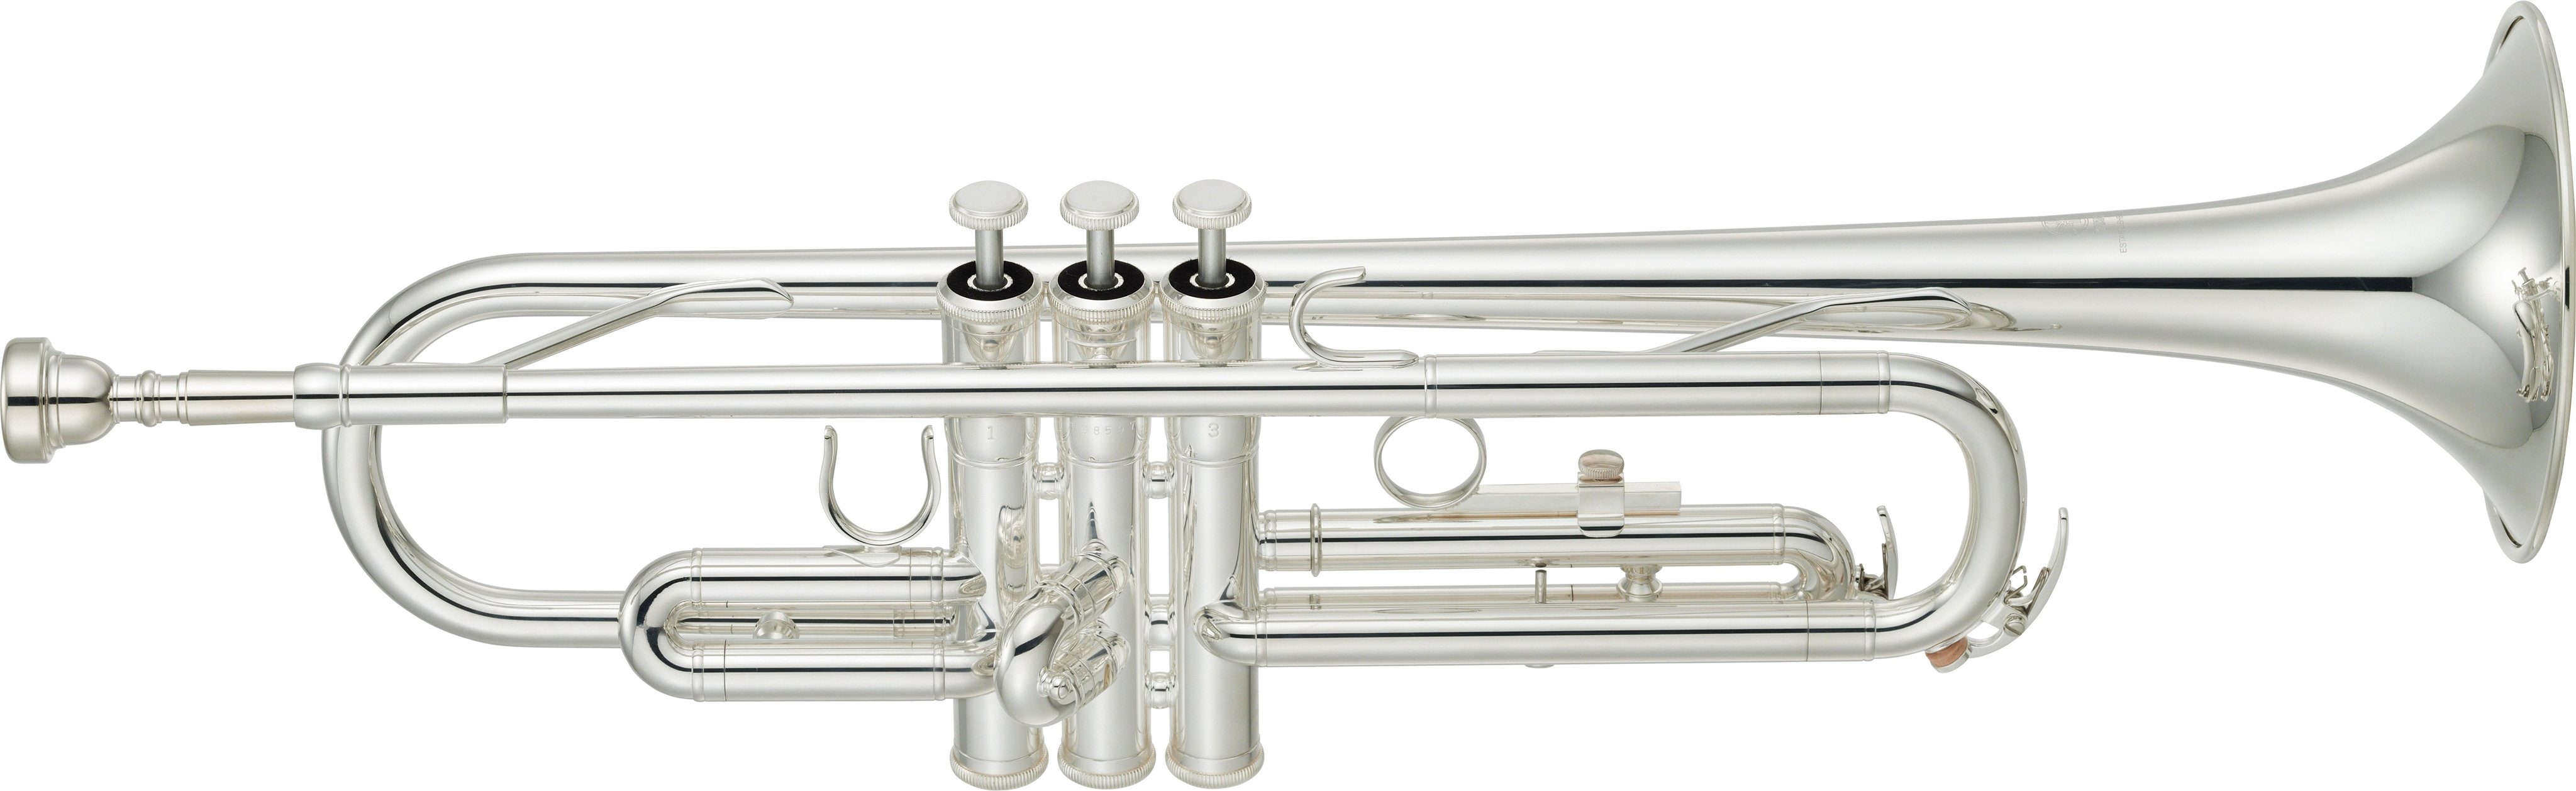 YTR-2330 - Overview - Bb Trumpets - Trumpets - Brass & Woodwinds 